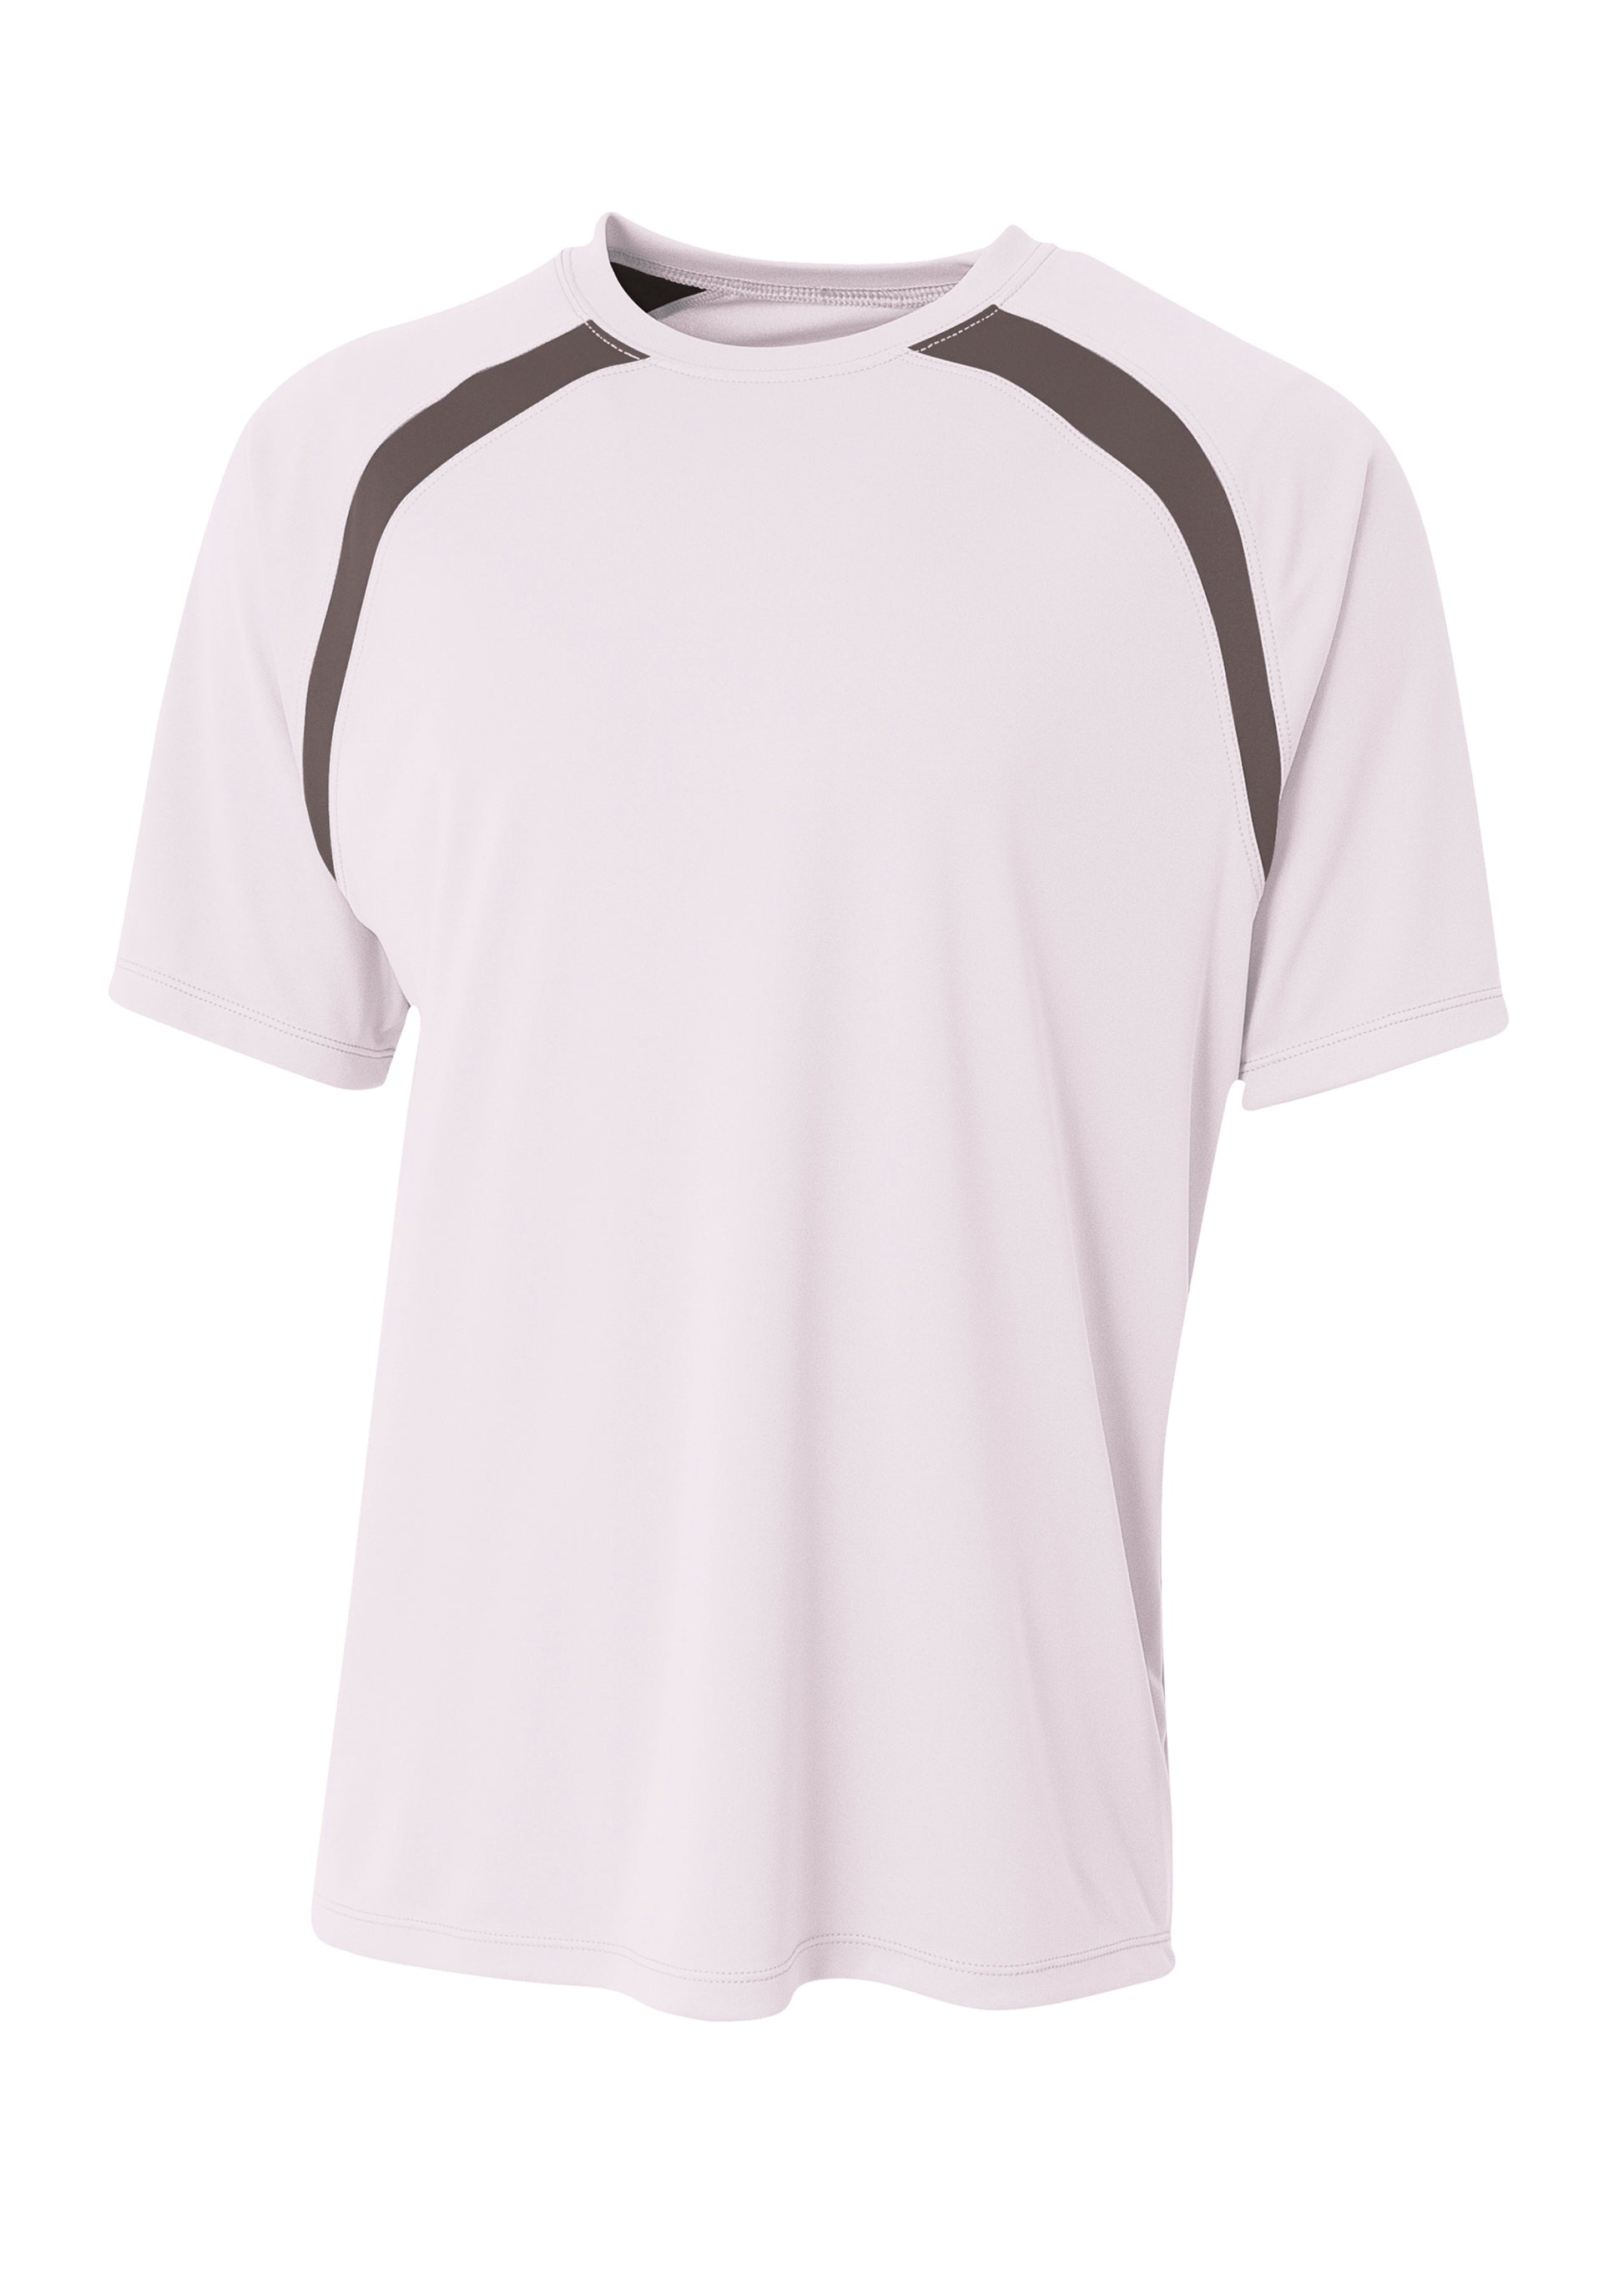 Photo of A4 SHIRTS NB3001  color  WHITE/GRAPHITE